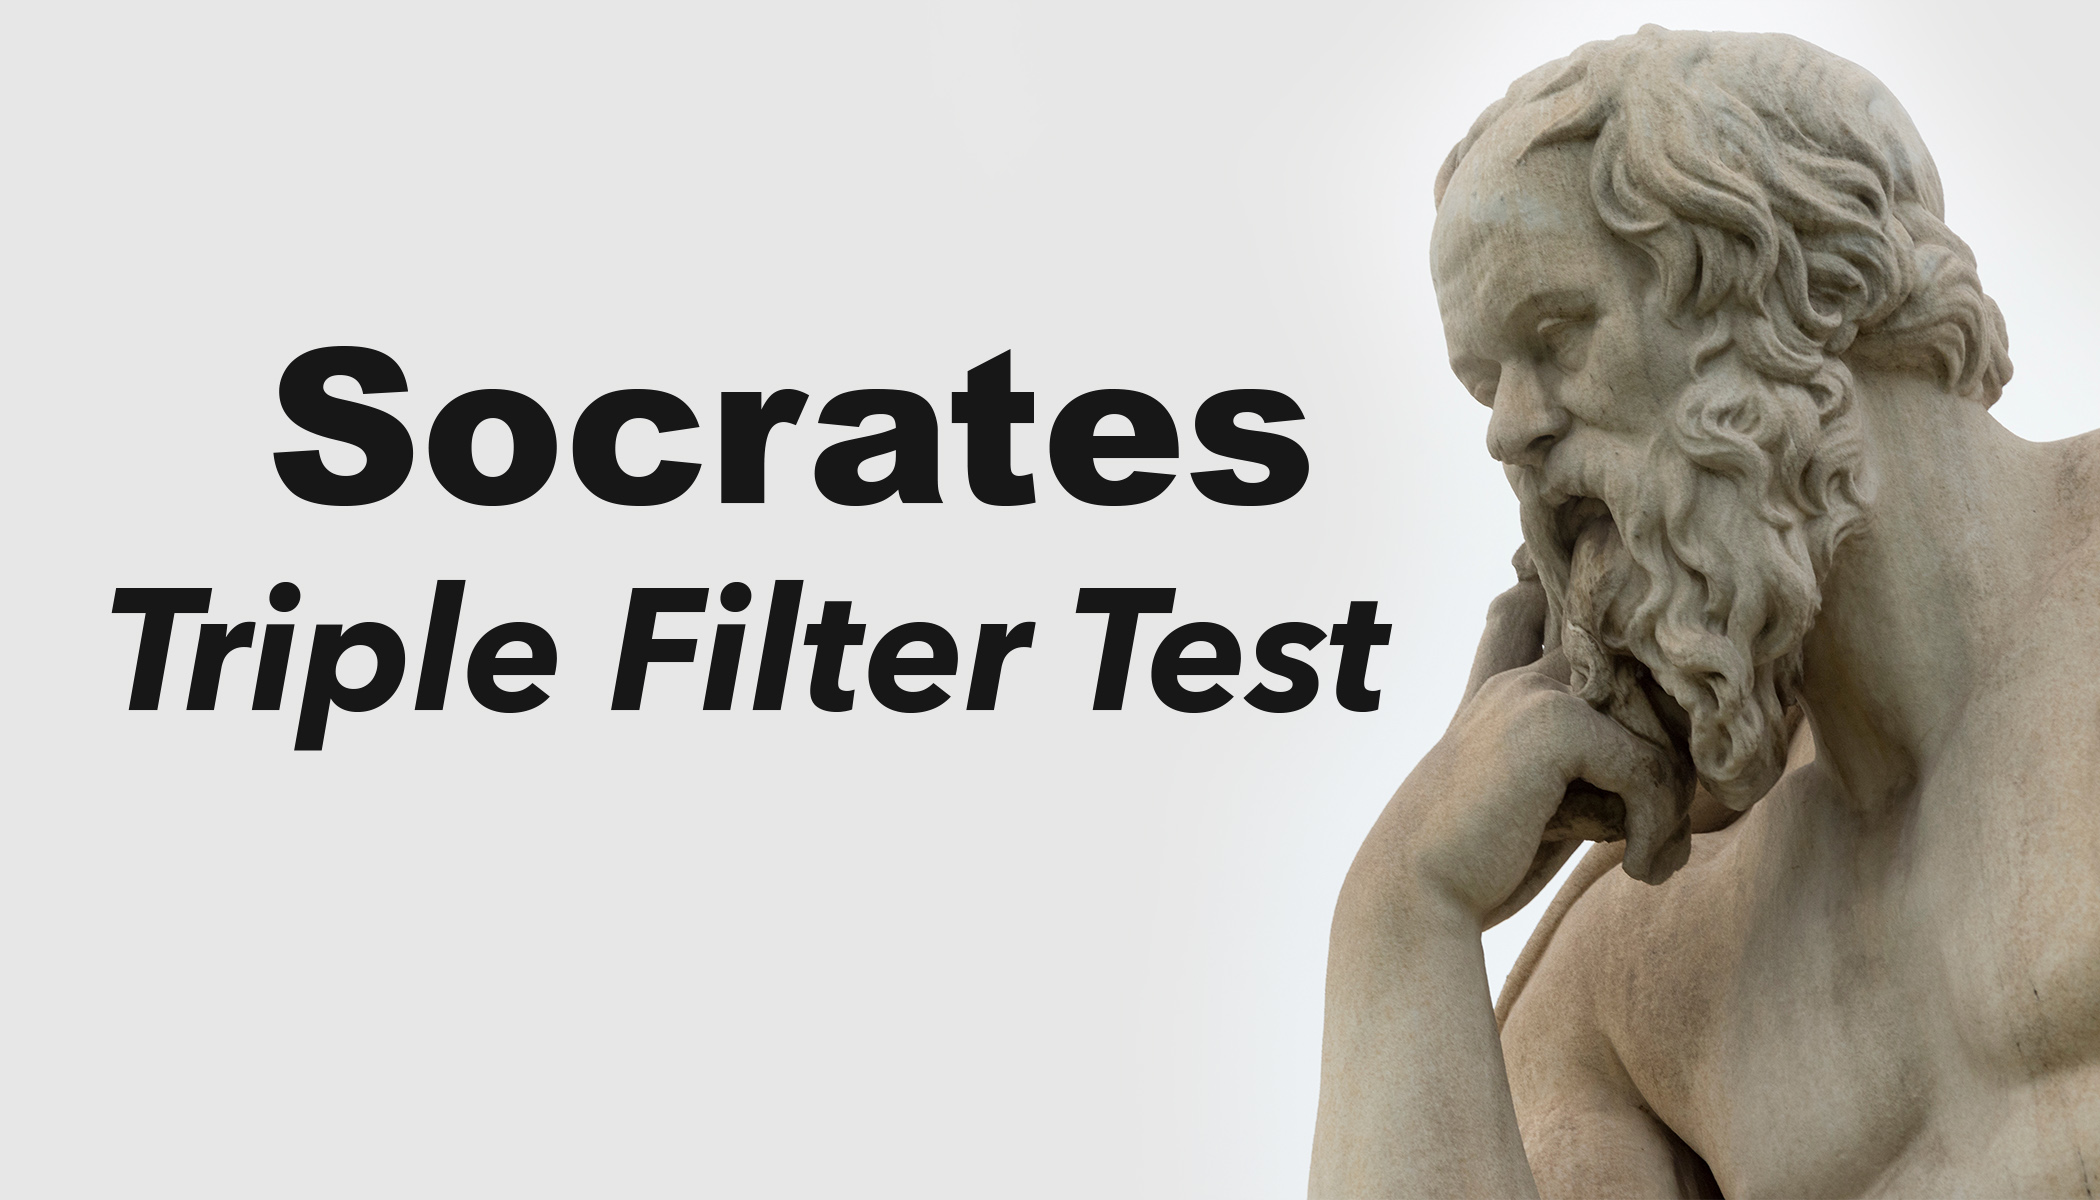 Socrates's 'Triple Filter Test': A Path Toward Righteous Living